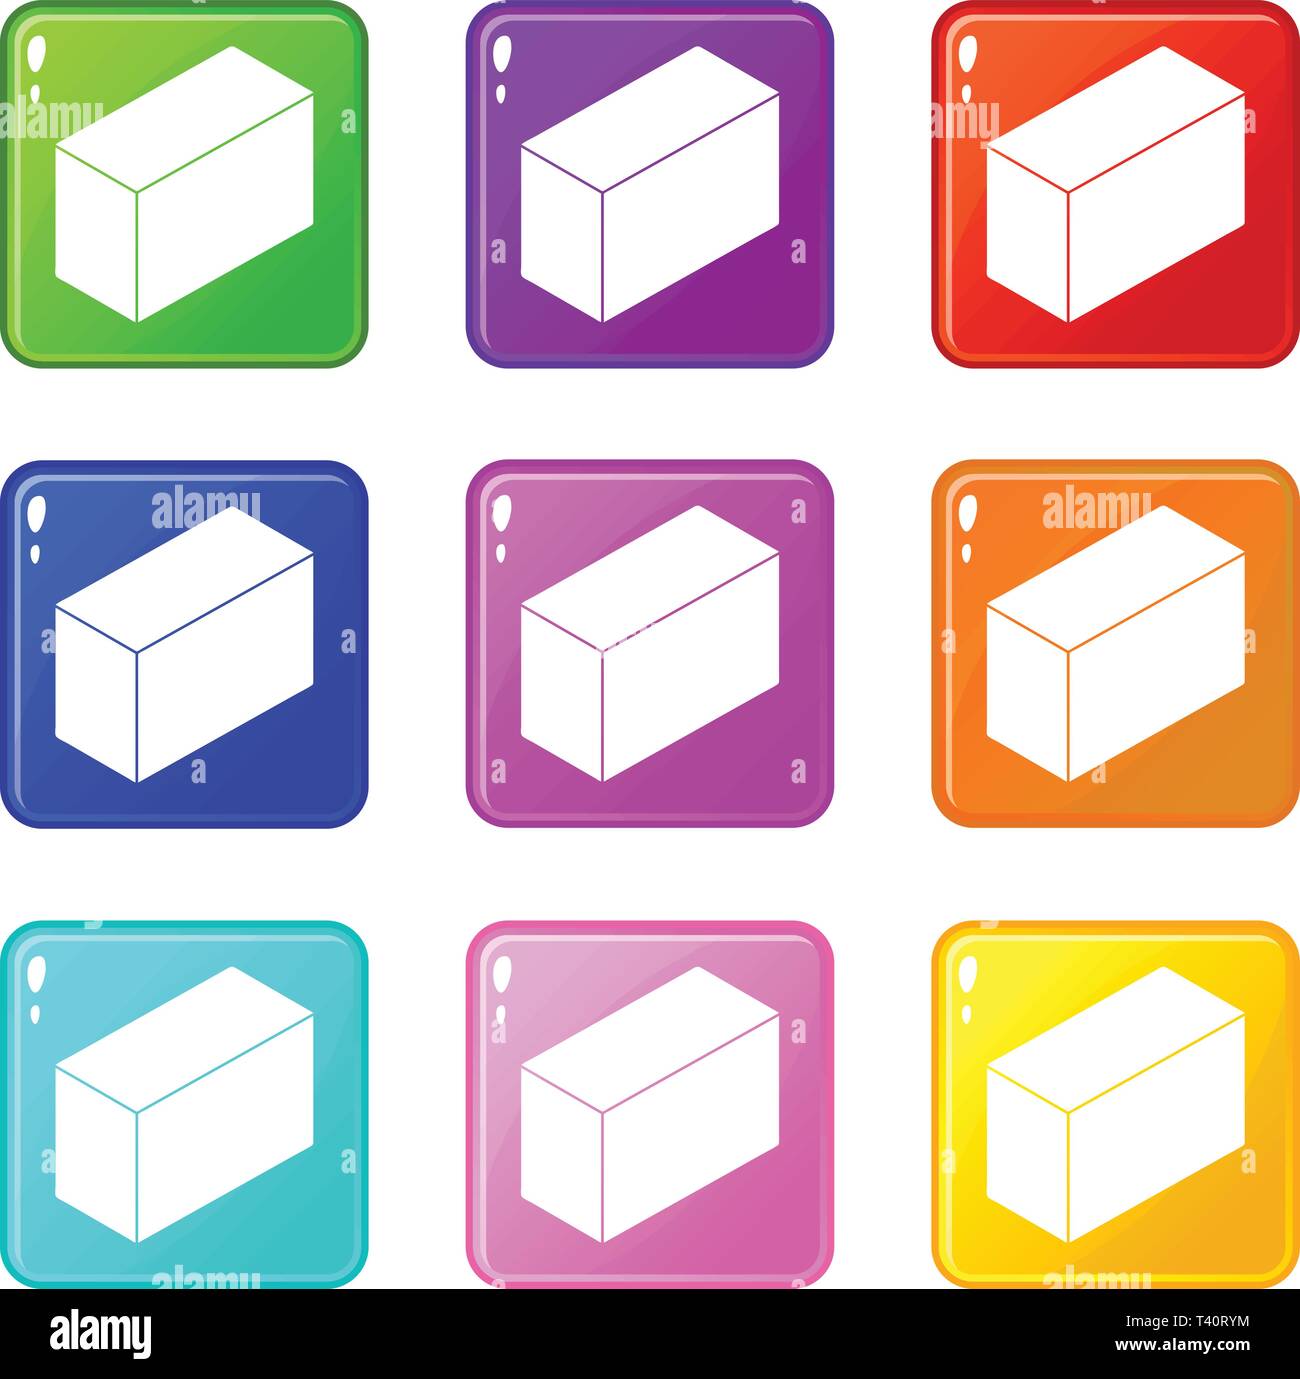 Cement block icons set 9 color collection Stock Vector